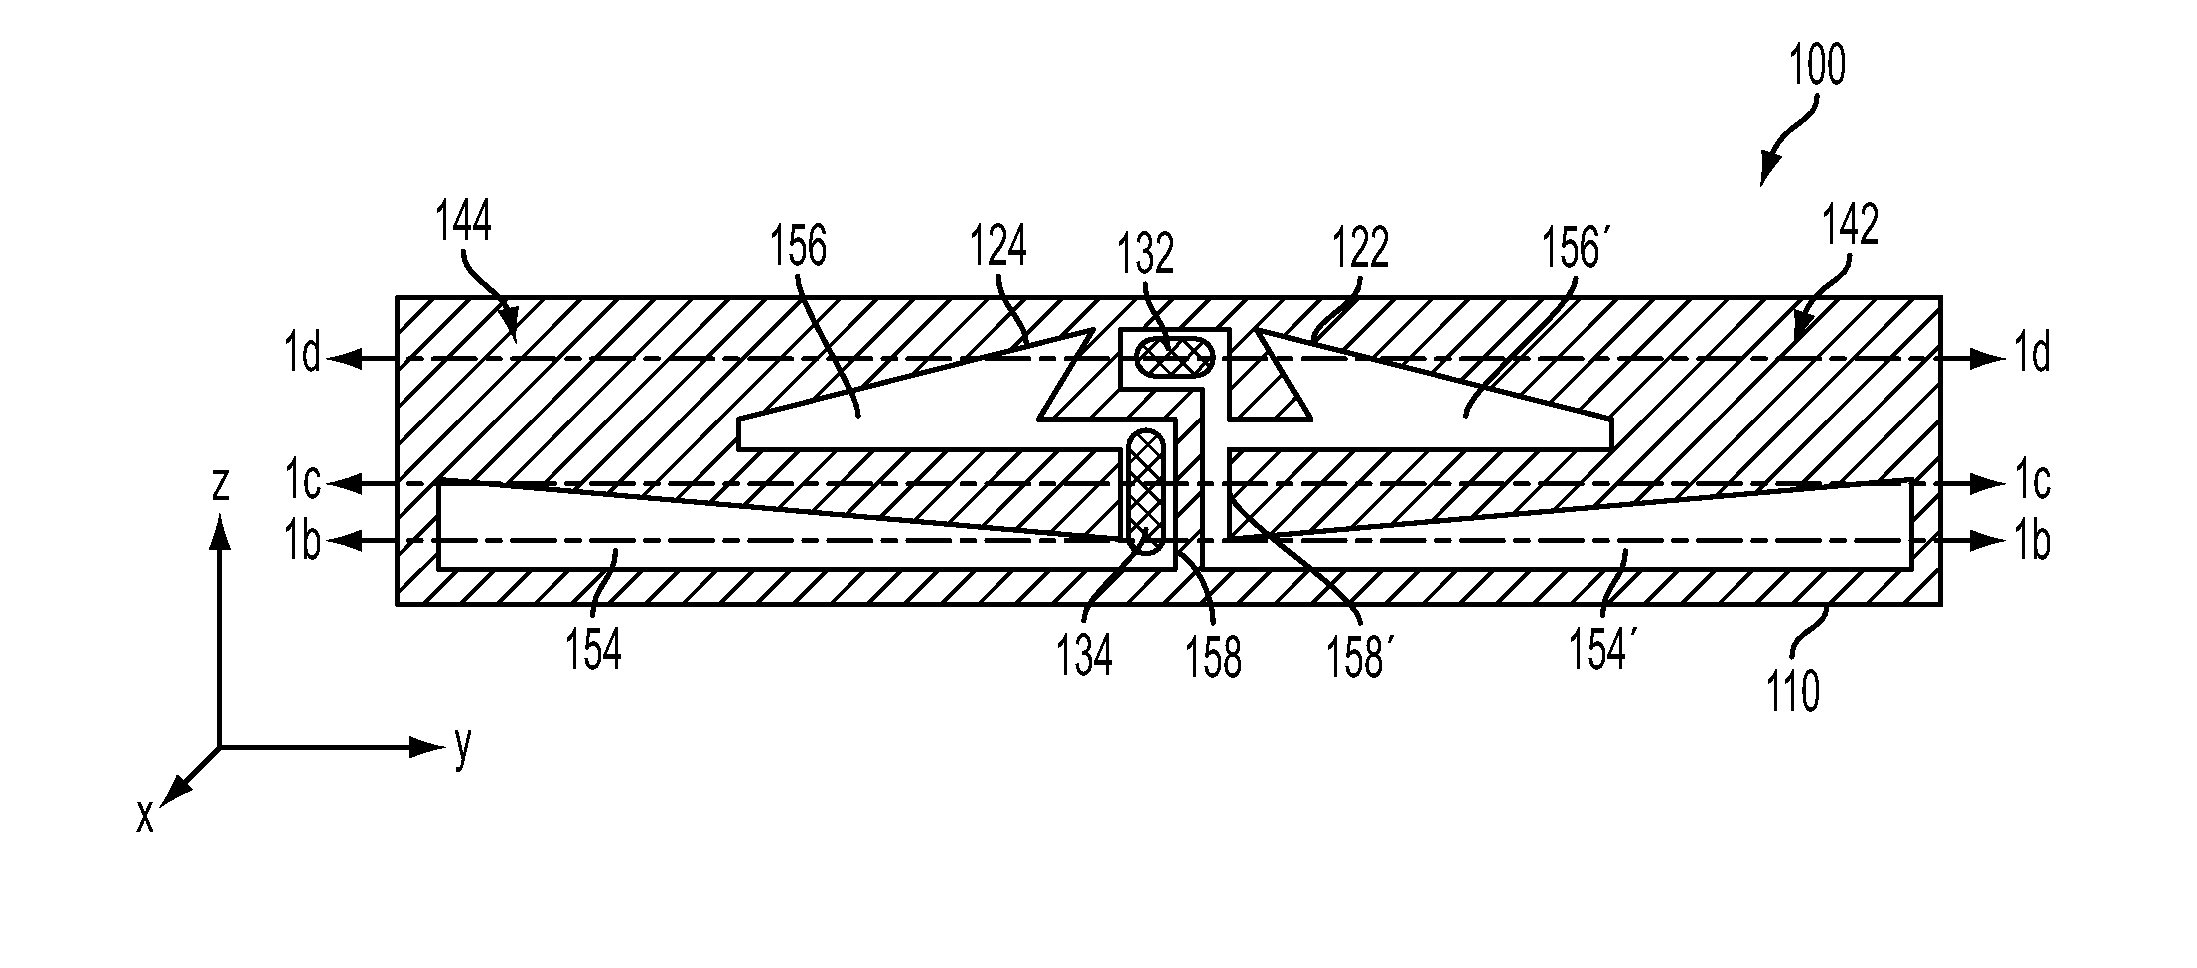 Coupled Dual-Band Dipole Antenna with Interference Cancellation Gap, Method of Manufacture and Kits Therefor